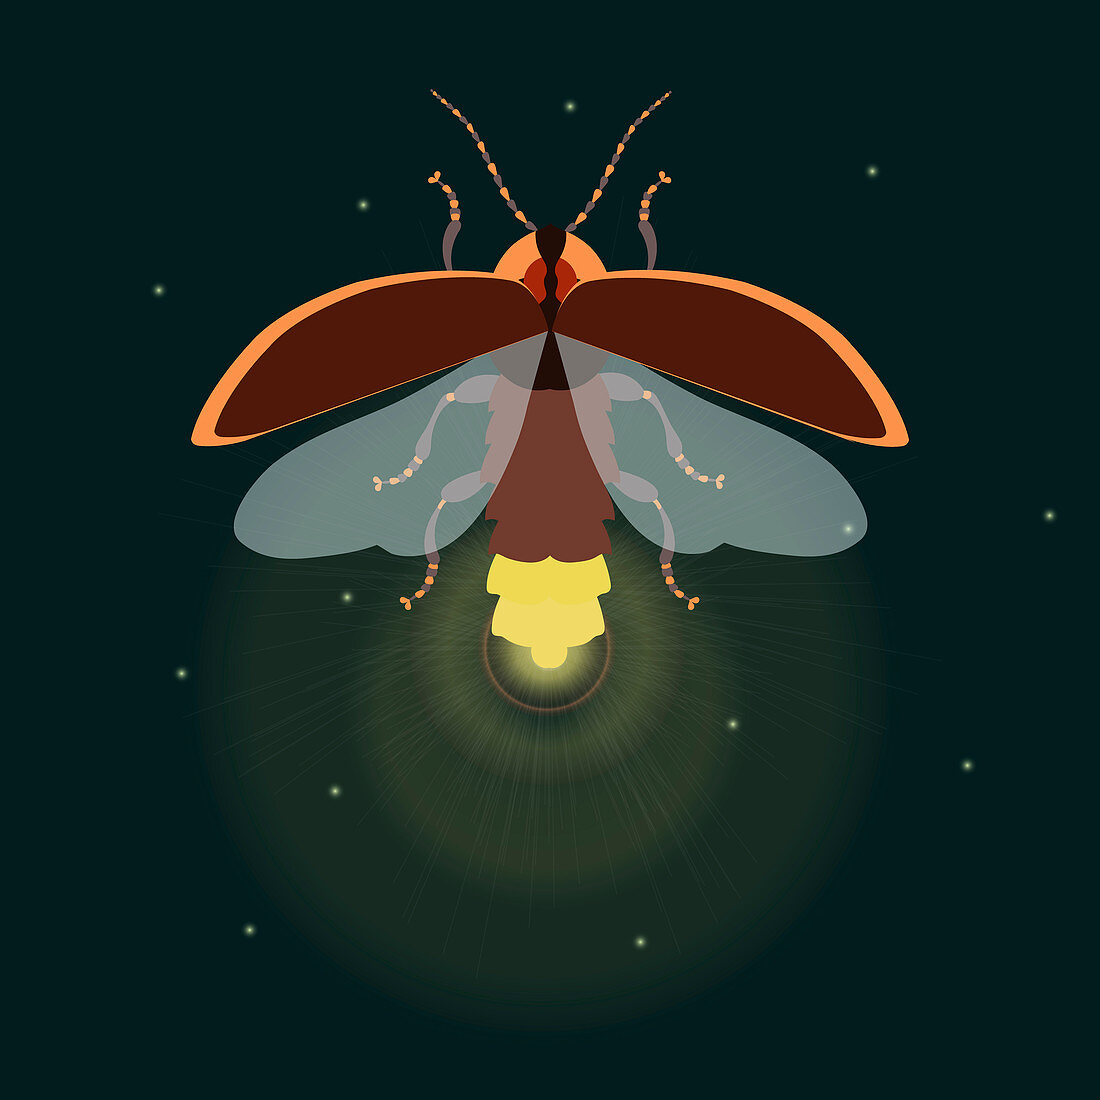 Firefly with open wings, illustration